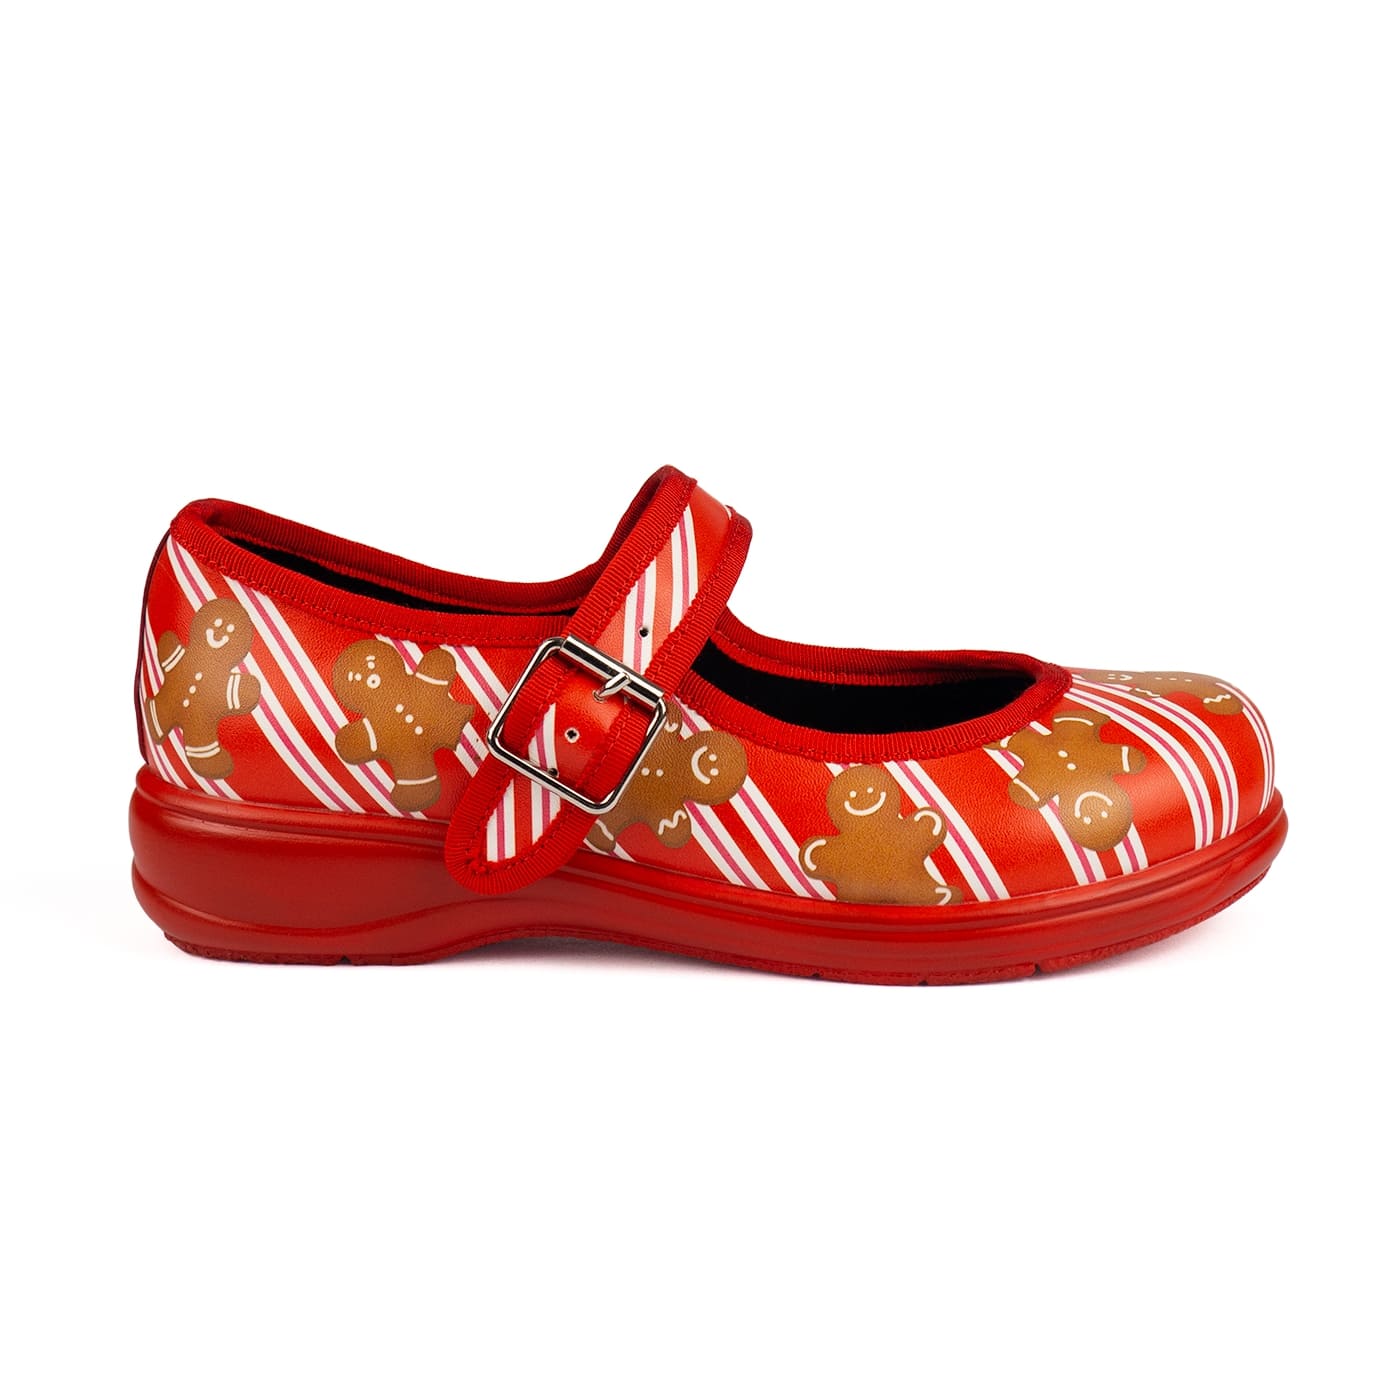 For Santa Mary Janes by RainbowsAndFairies.com.au (Christmas Shoes - Gingerbread - Mismatched Shoes - Cute & Comfy - Buckle Up Shoes) - SKU: FW_MARYJ_SANTA_ORG - Pic-04